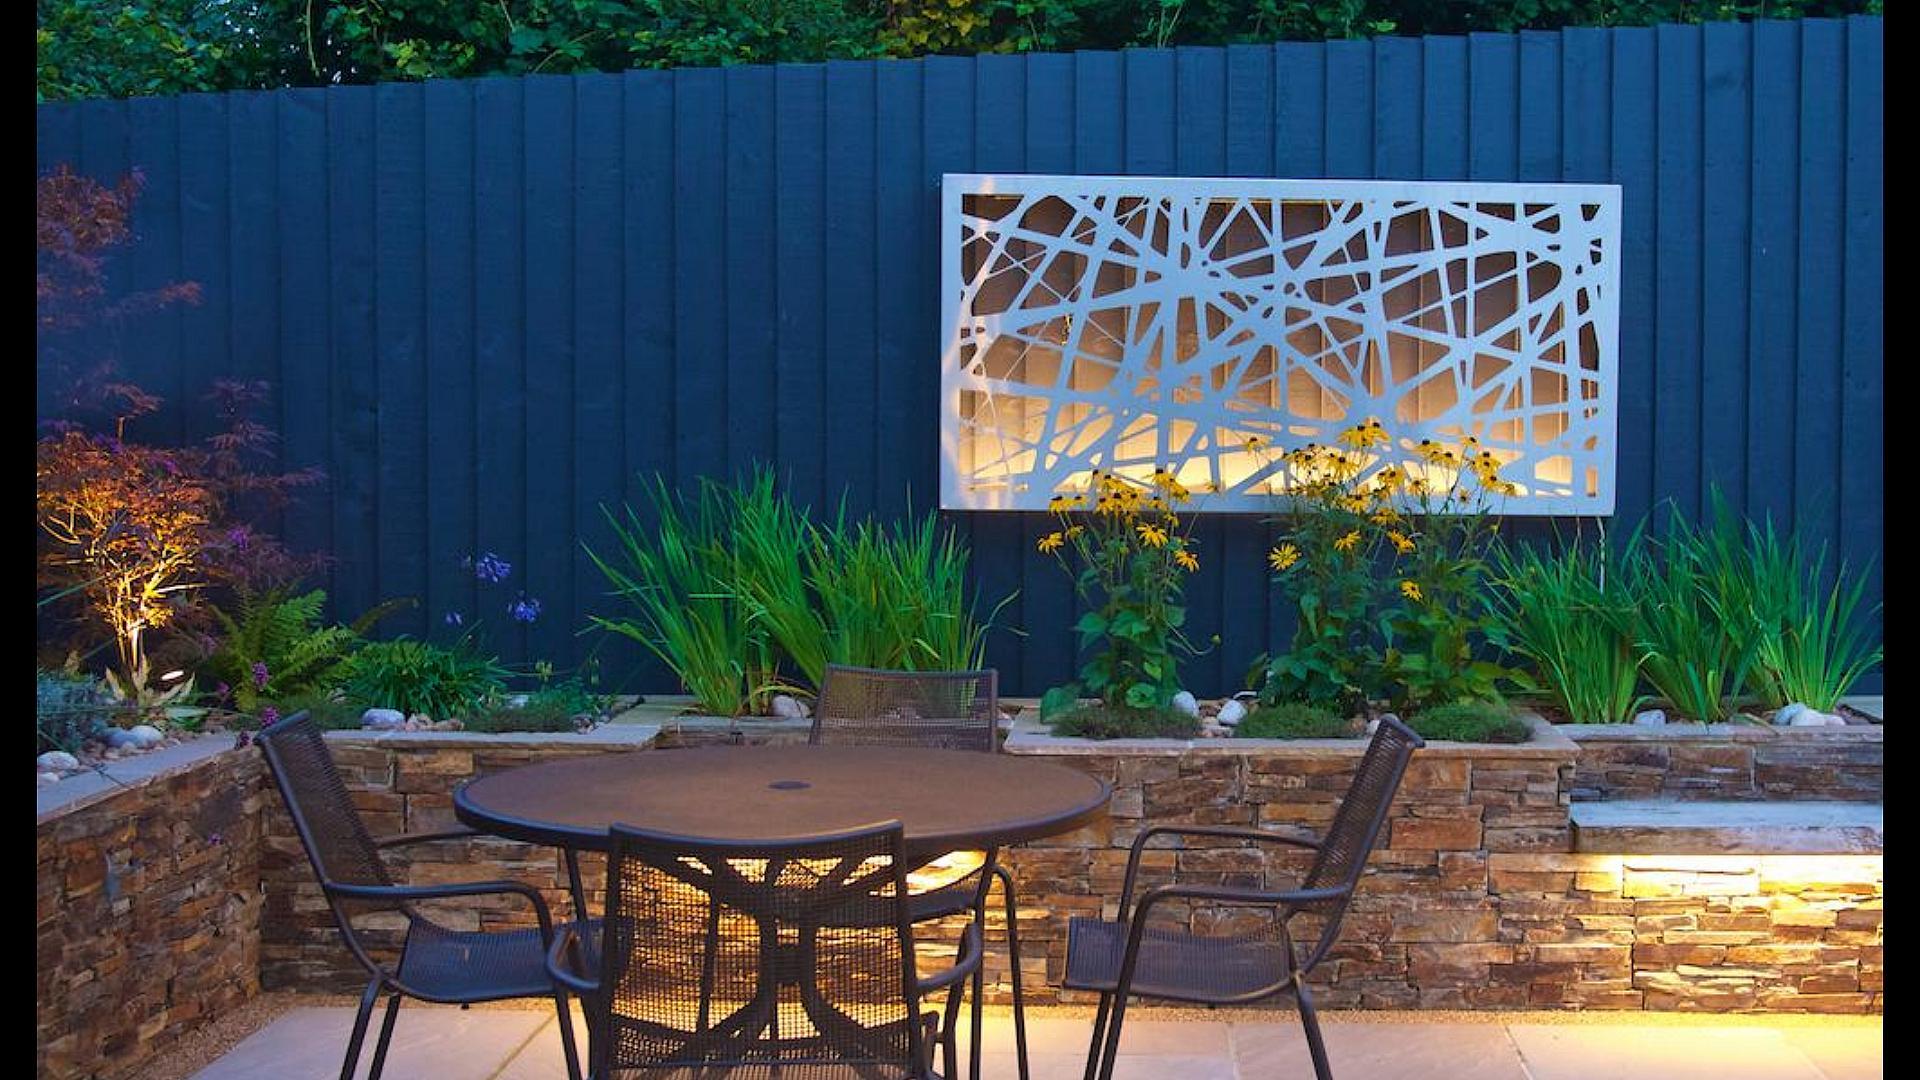 Alison Bockh Garden Design - Lighting makes for a very useable space at night.